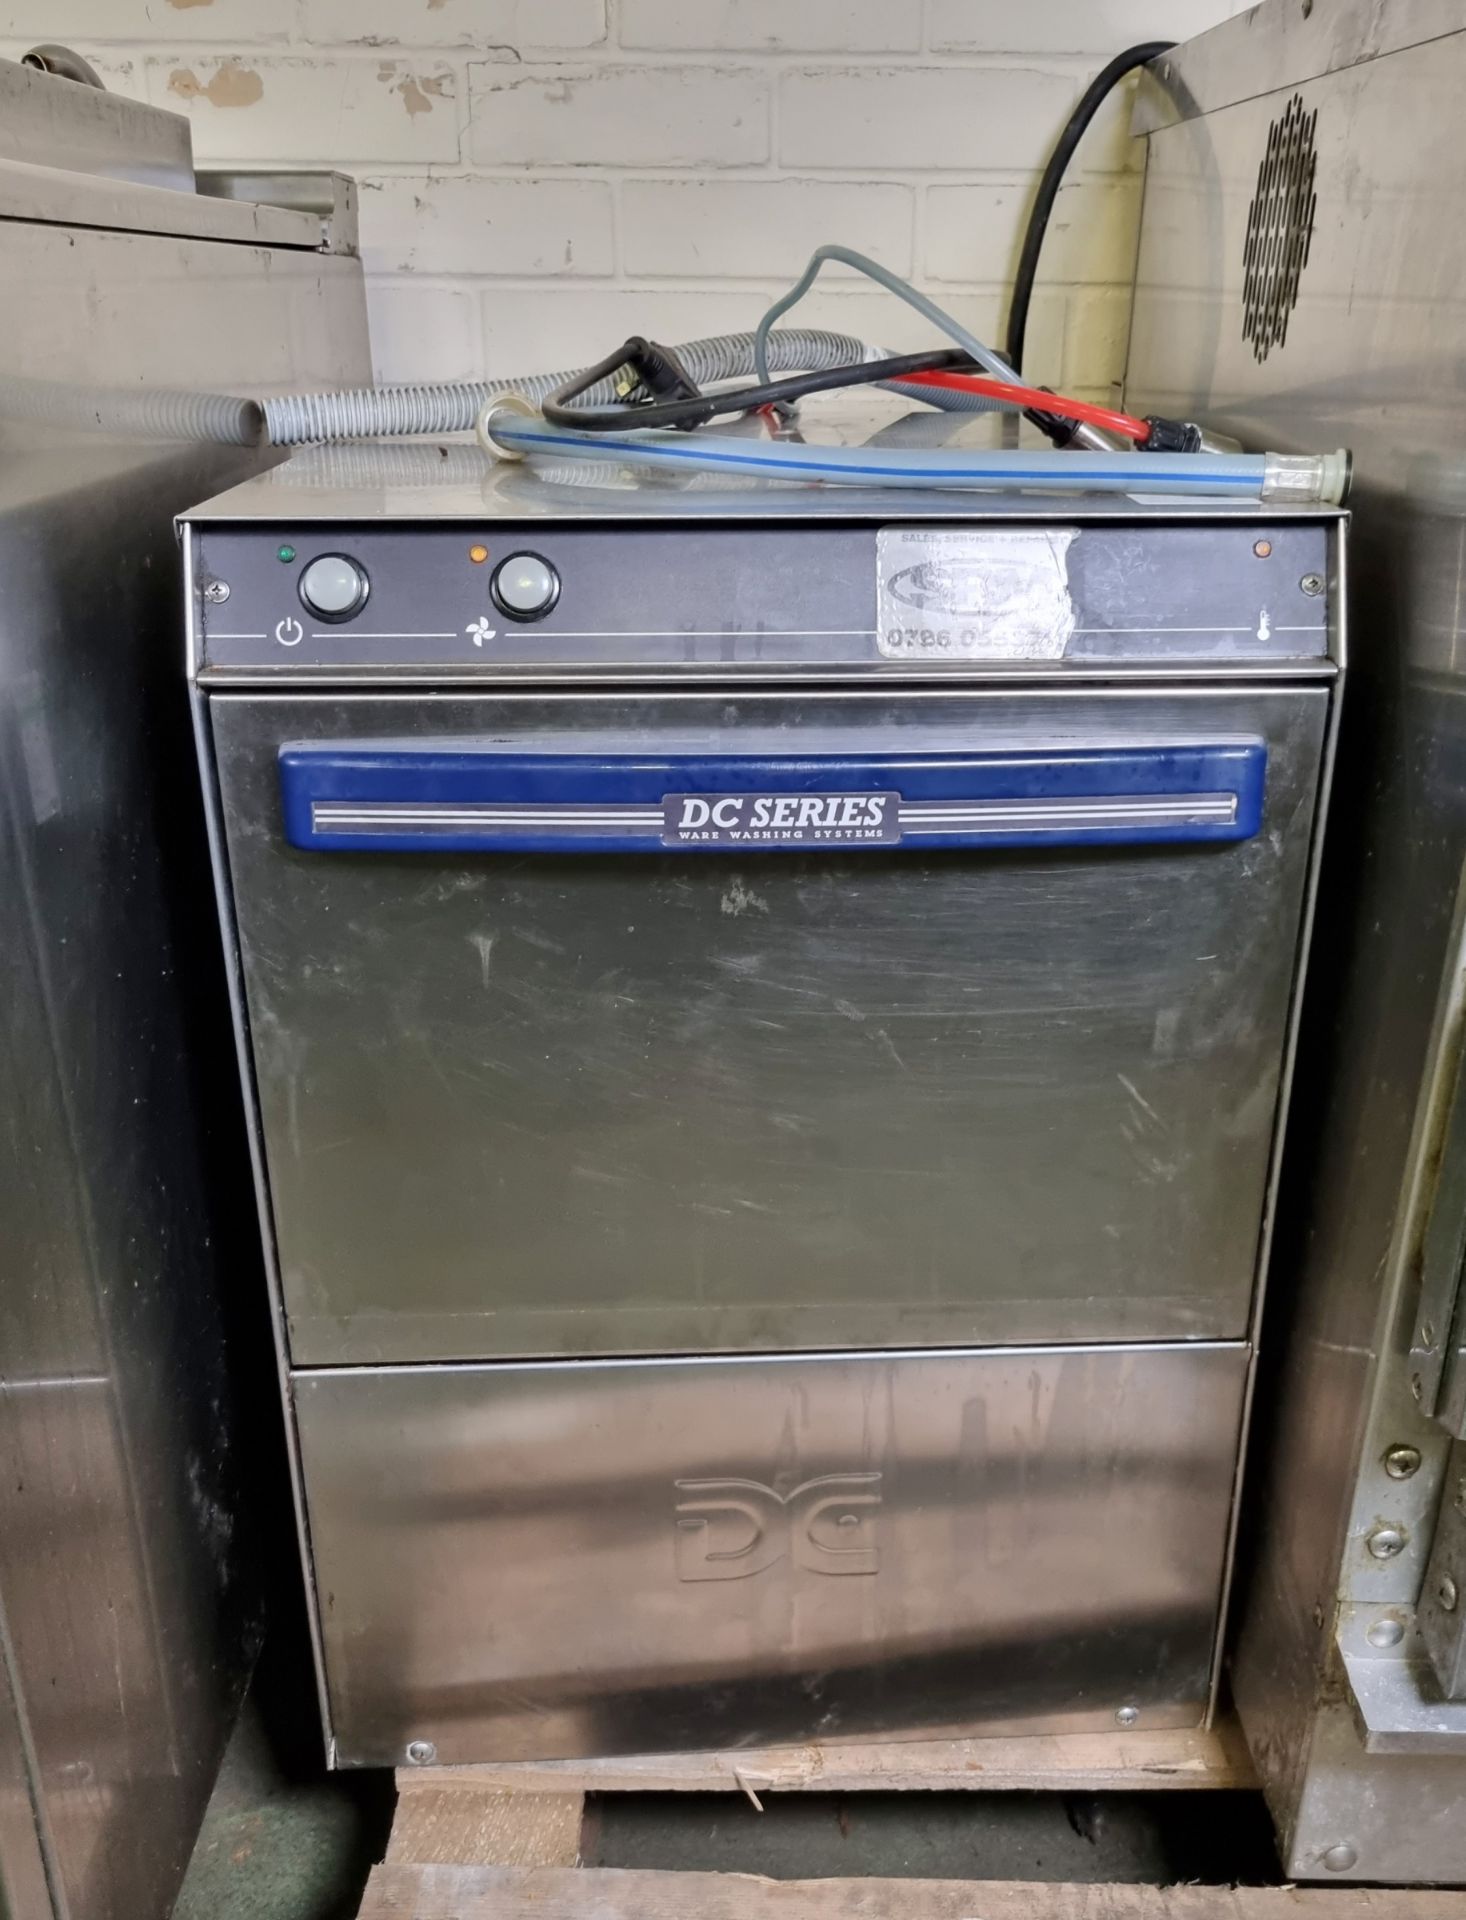 DC SG40 D glass washer - W 470 x D 550 x H 640 mm